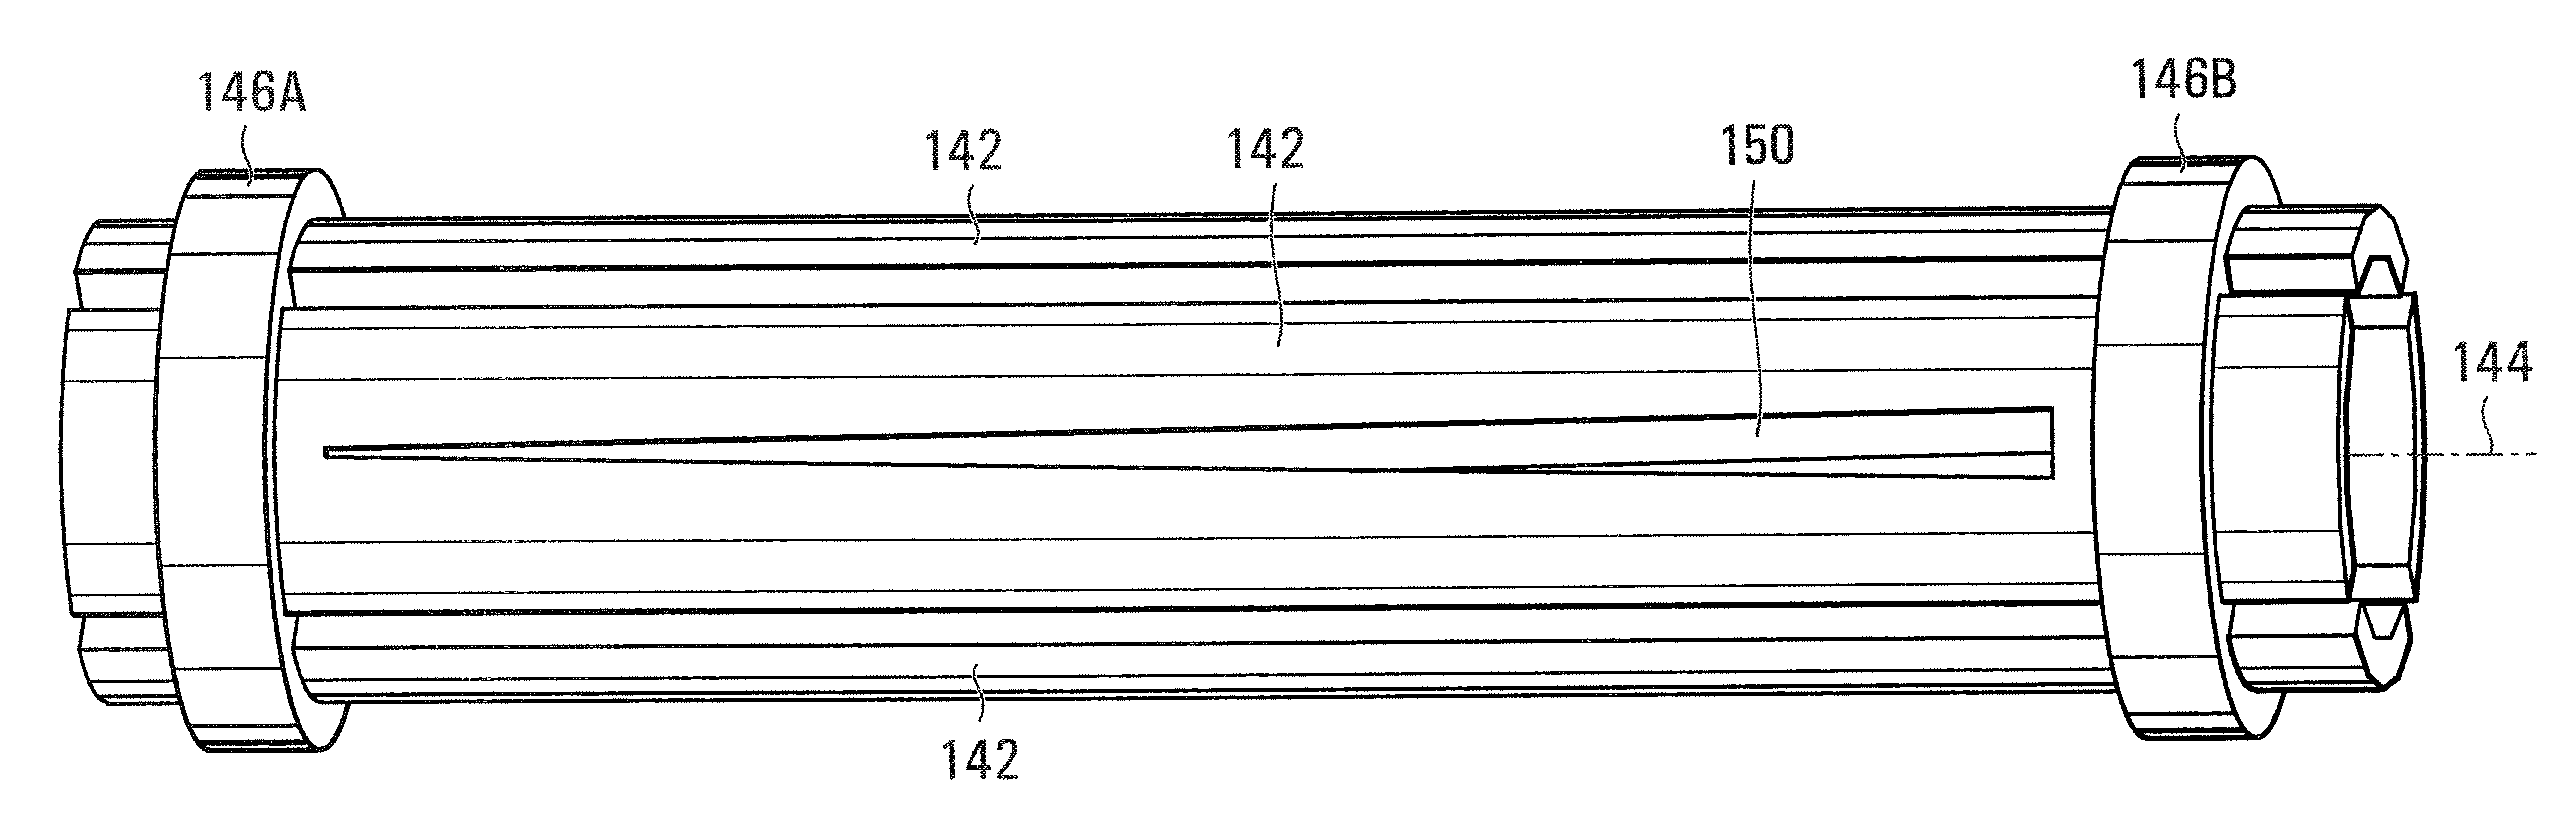 Mass spectrometer ion guide providing axial field, and method